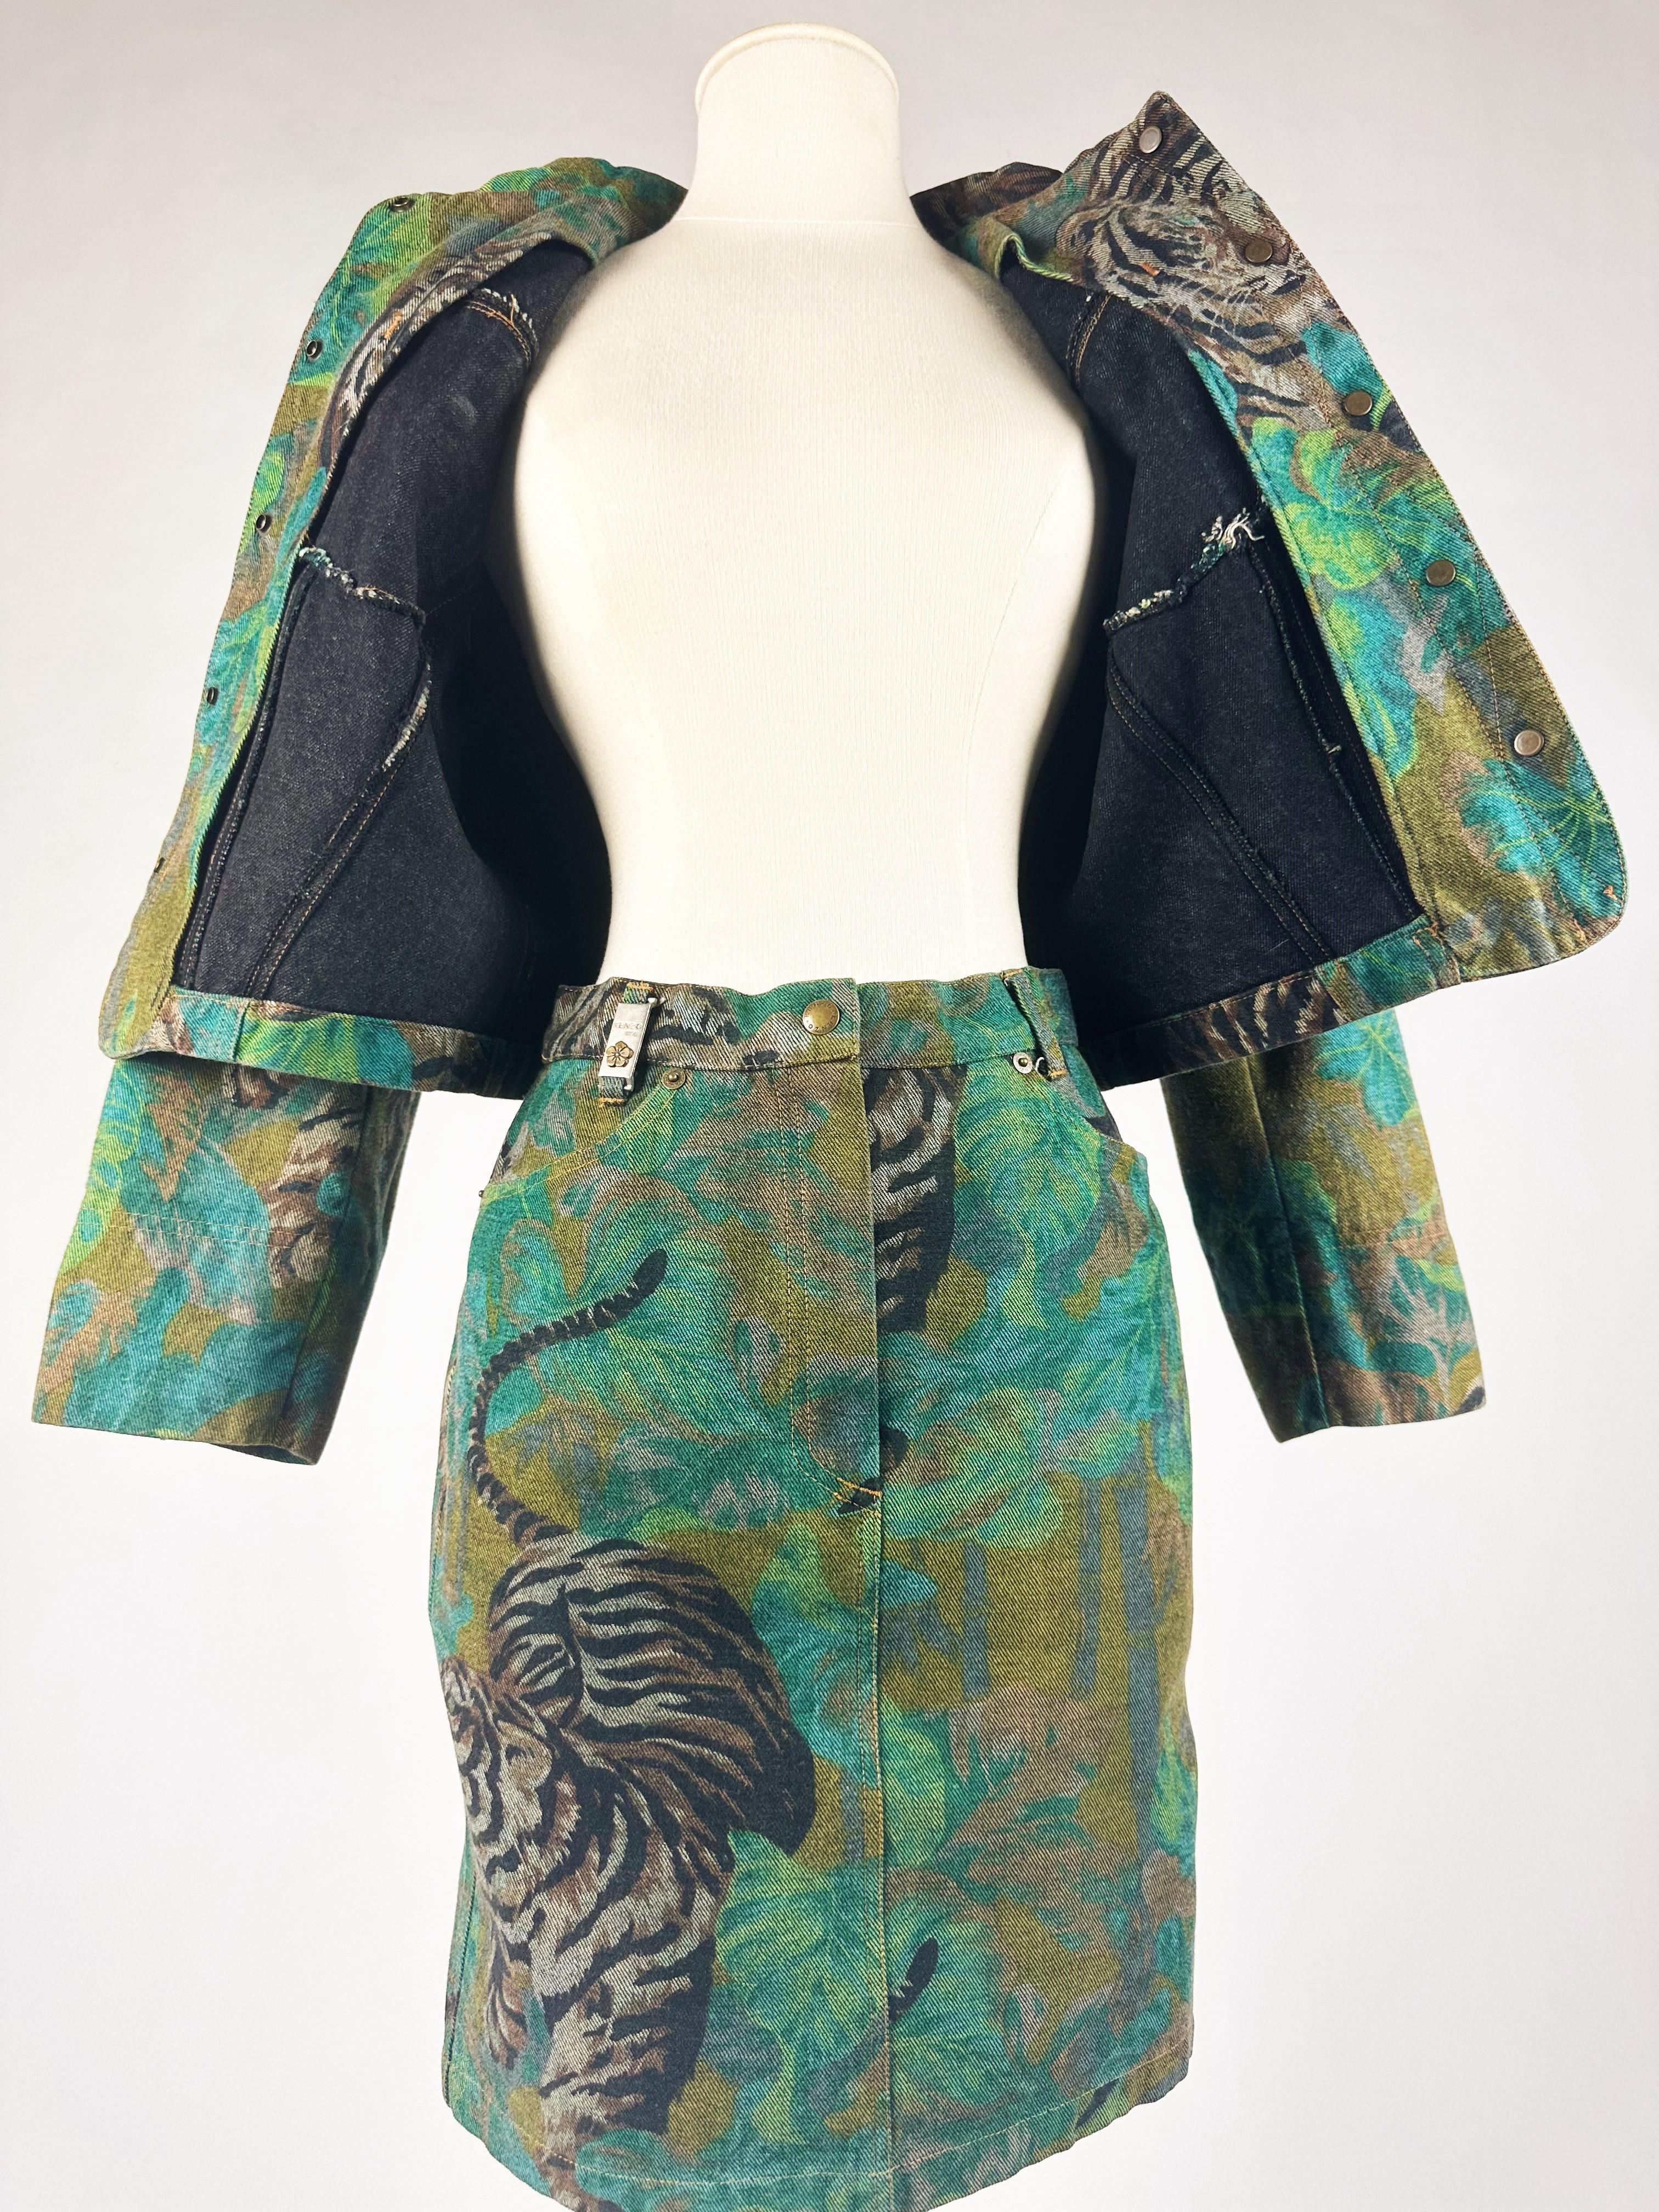 Jacket and Skirt by Kenzo Takada, Jungle & Tiger Print on Denim - French C. 1990 For Sale 4